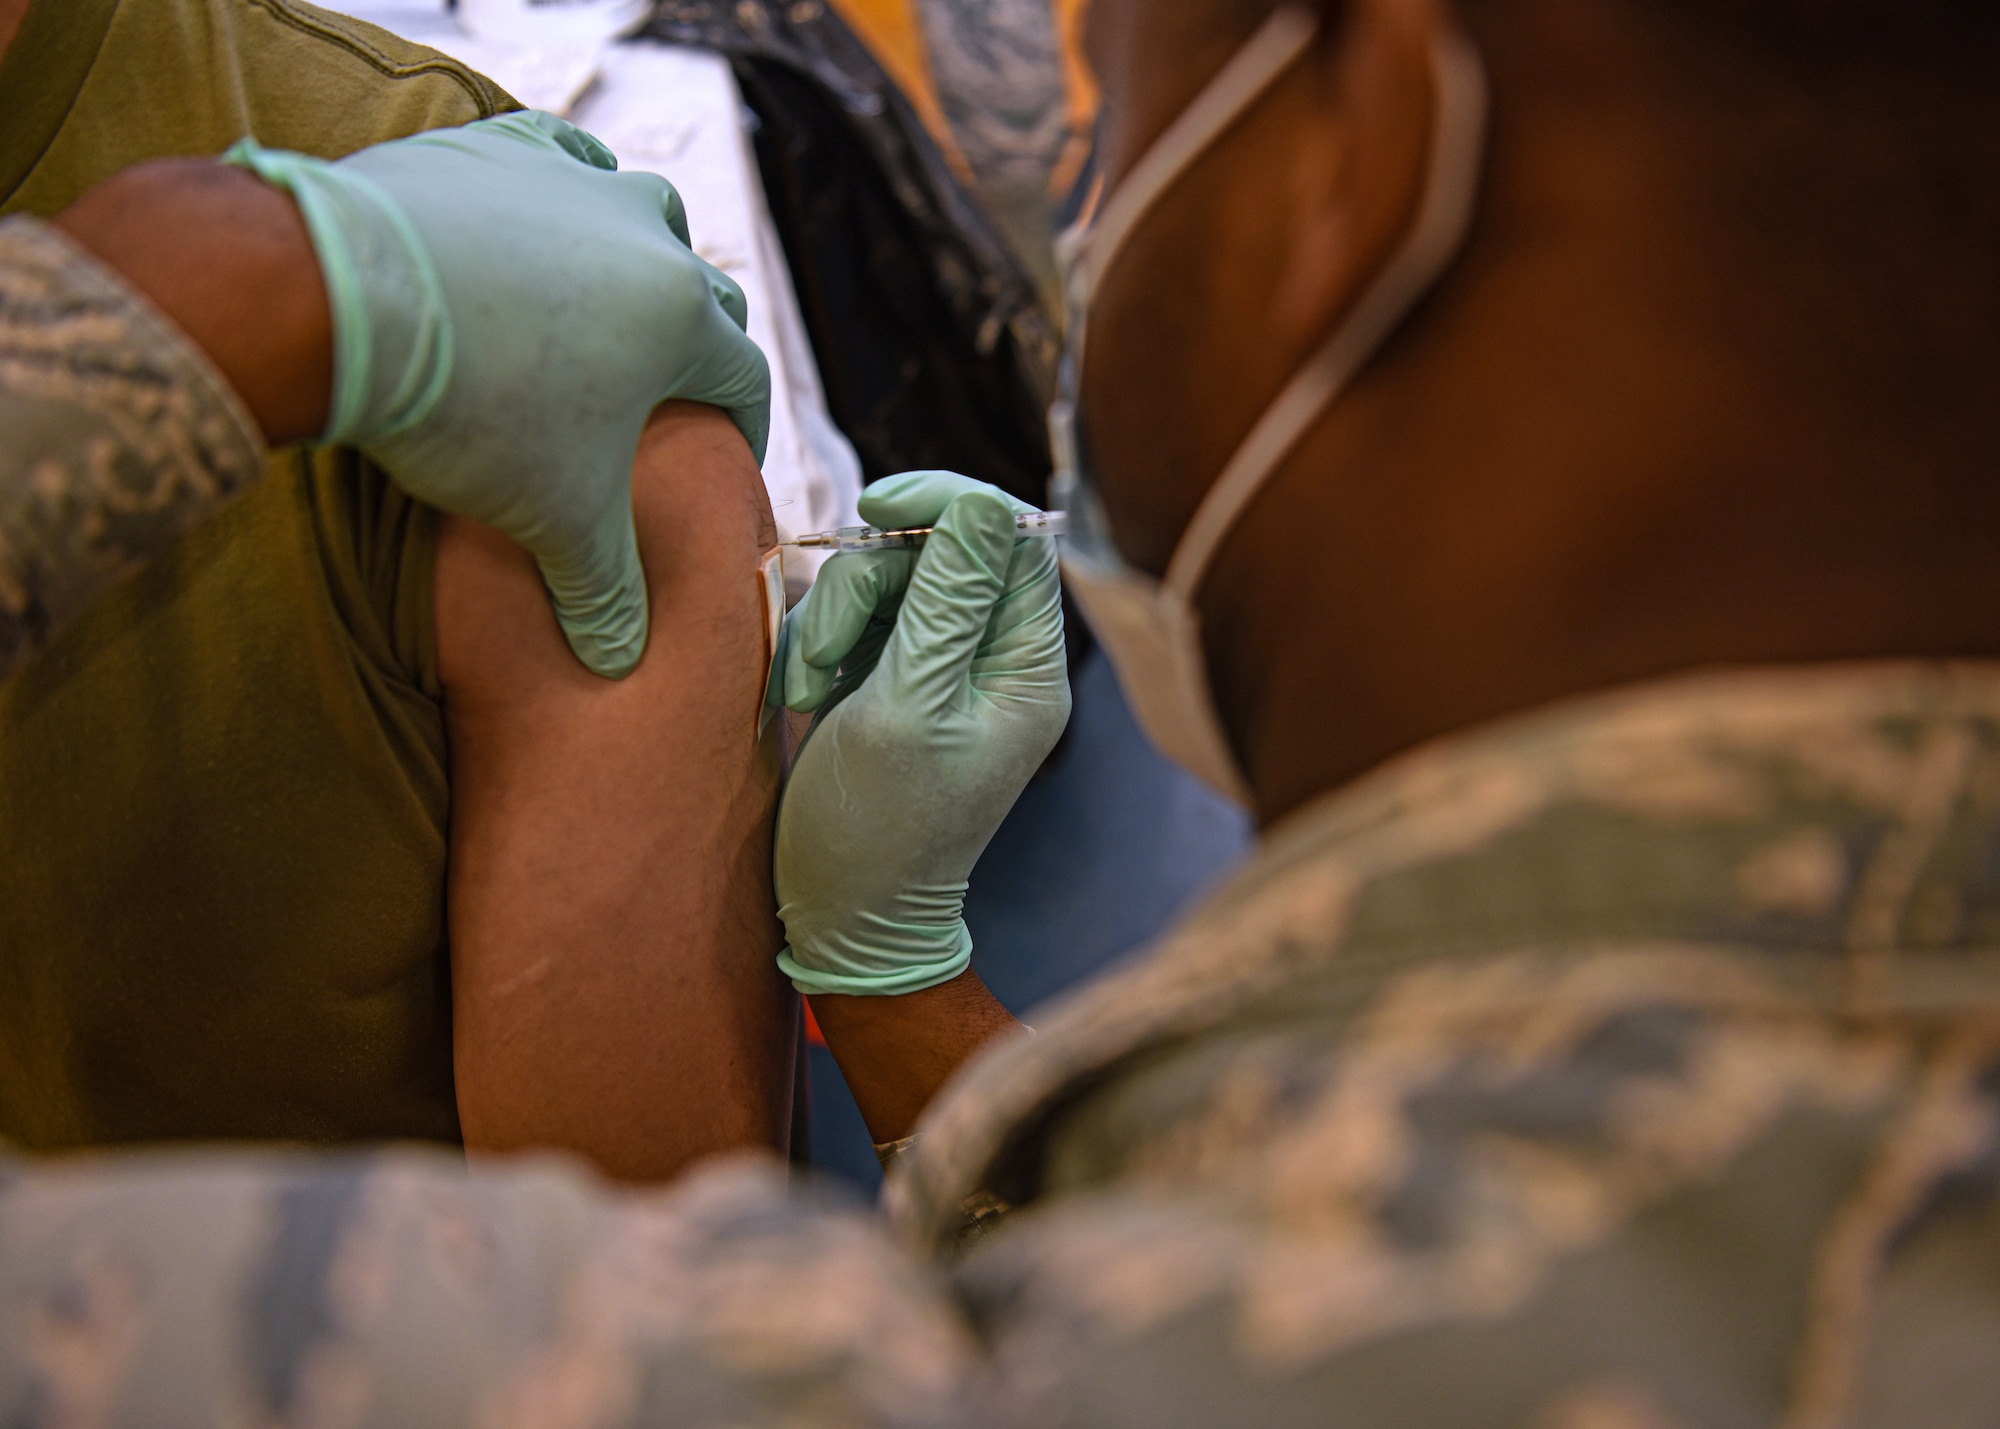 U.S. Air Force Senior Airman Marckus Humphries, 17th Operational Medical Readiness Squadron aerospace medical technician, administers a COVID-19 vaccination to Airman 1st Class Brandon Krogman, 17th Security Force Squadron defender, at the Mathis Fitness Center on Goodfellow Air Force Base, Texas, Jan. 20, 2021. Team Goodfellow vaccinated its frontline and mission essential positions, and those who are considered high risk first, in accordance with the Department of the Air Force’s distribution plan. (U.S. Air Force photo by Senior Airman Abbey Rieves)